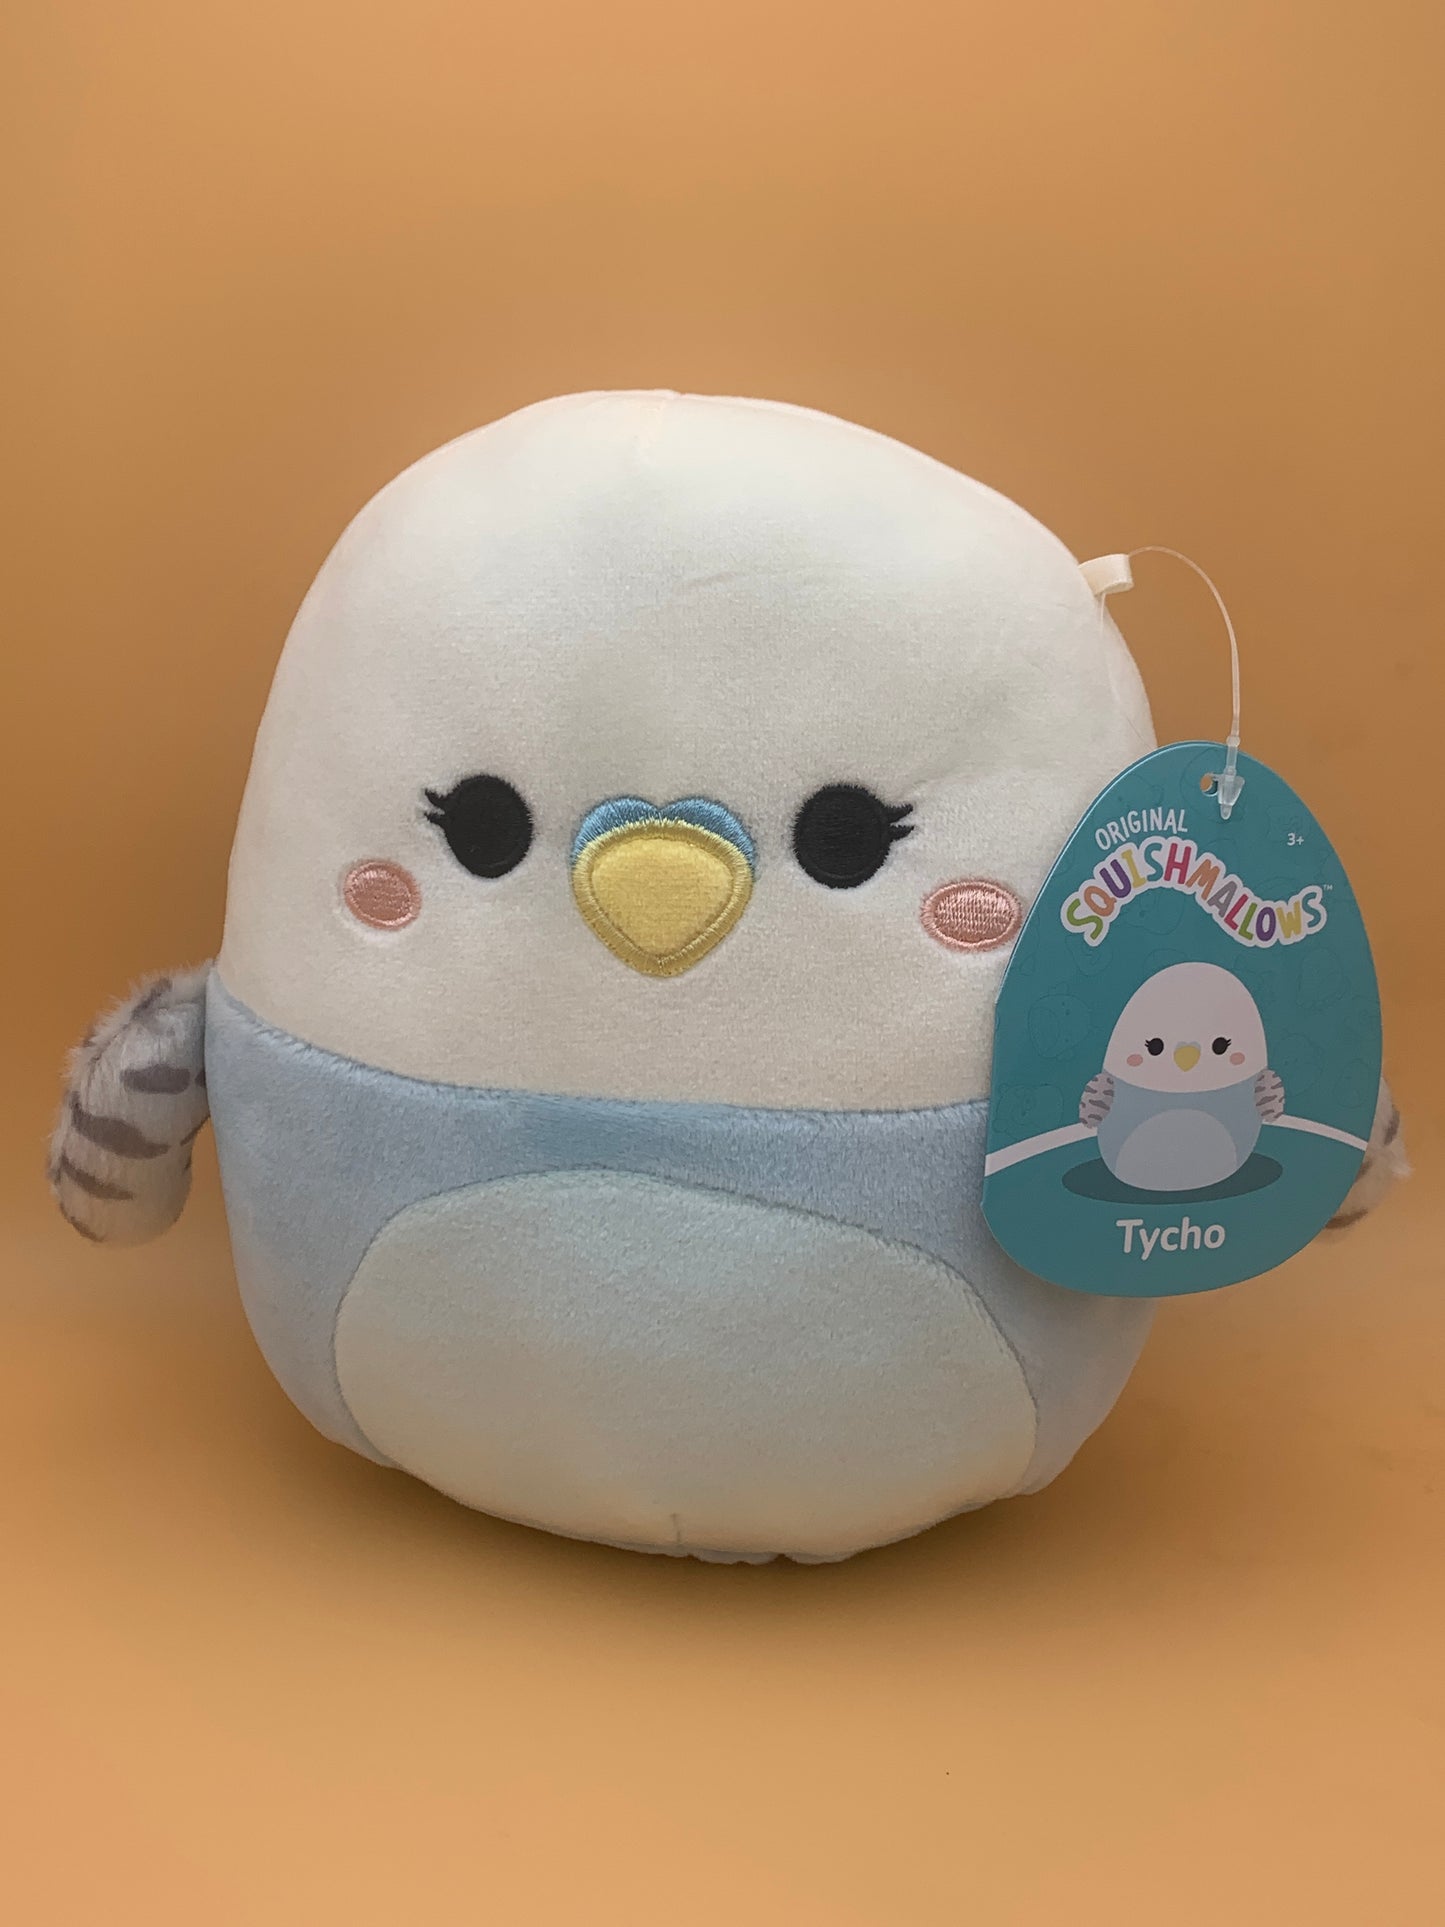 Squishmallow Tycho the Parakeet 7.5 inch